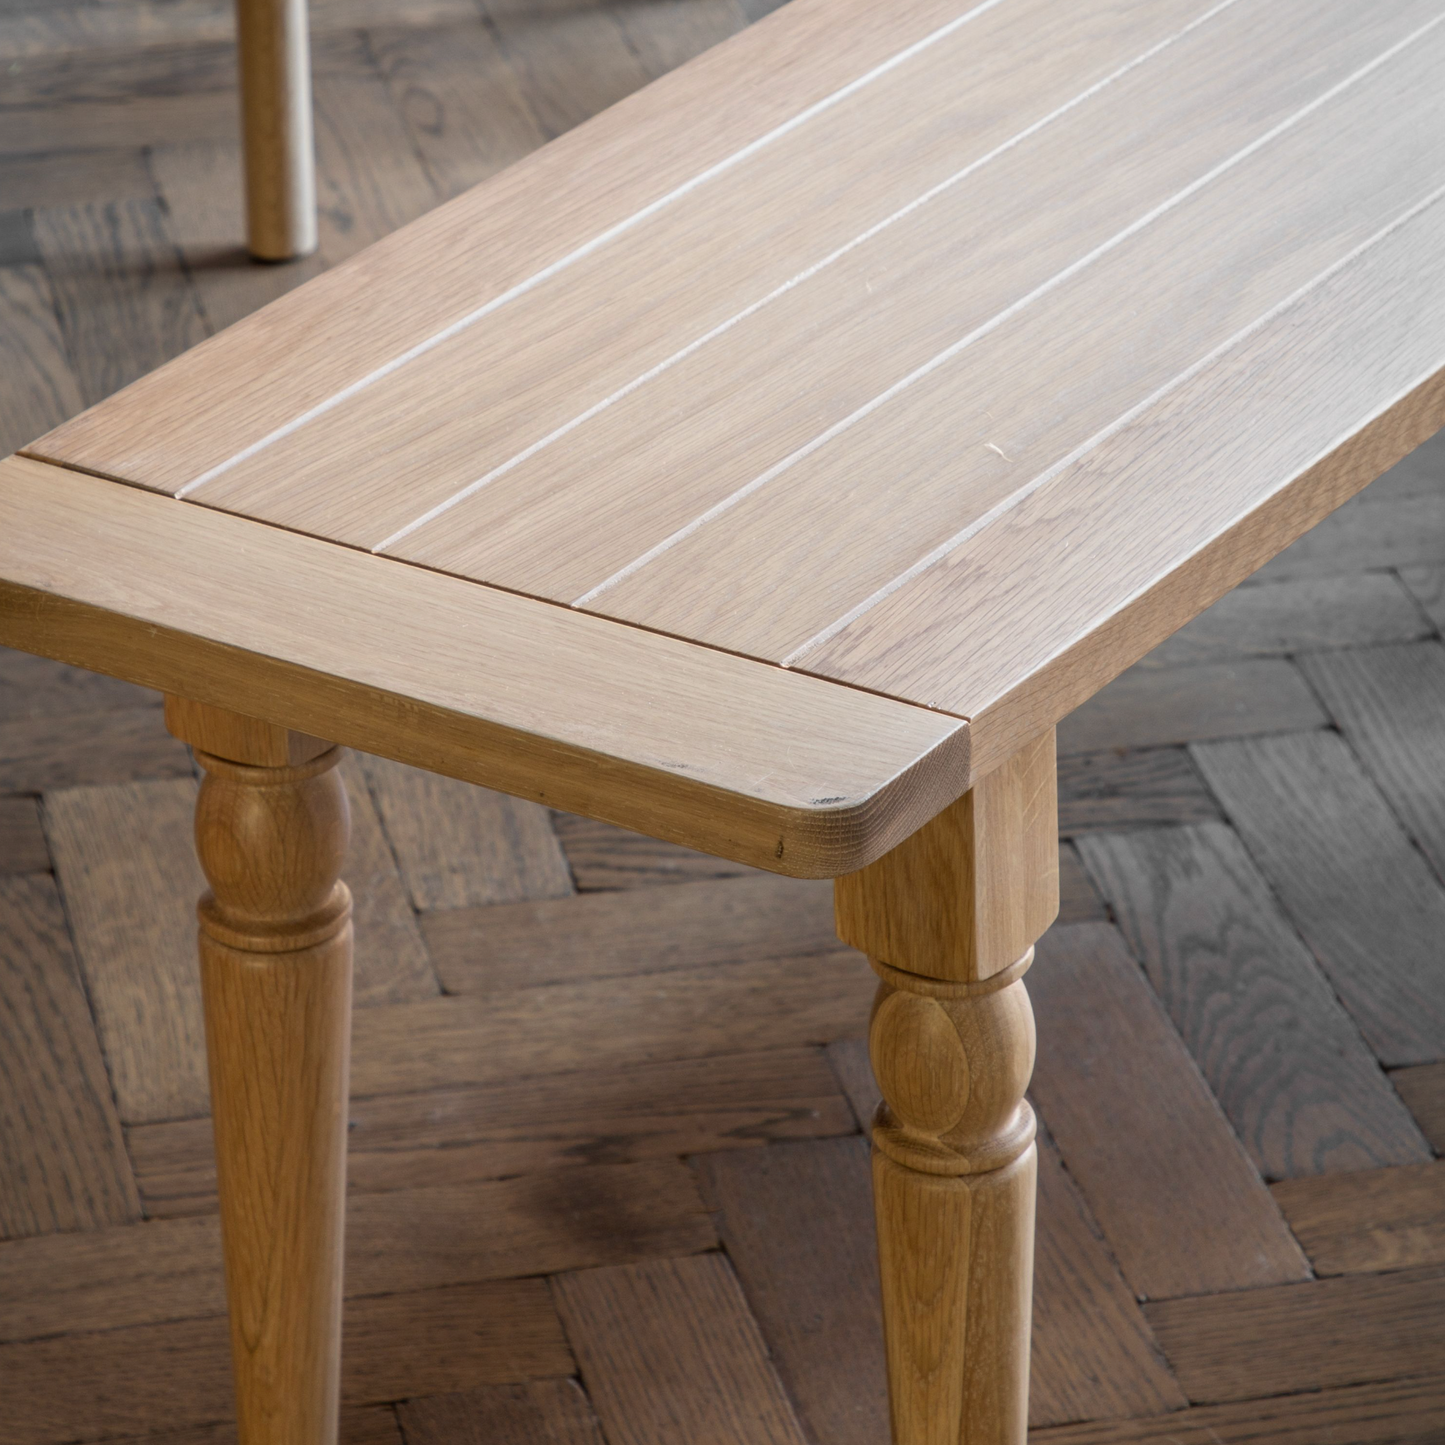 A Buckland oak dining bench from Kikiathome.co.uk adds interior decor to a wooden floor.